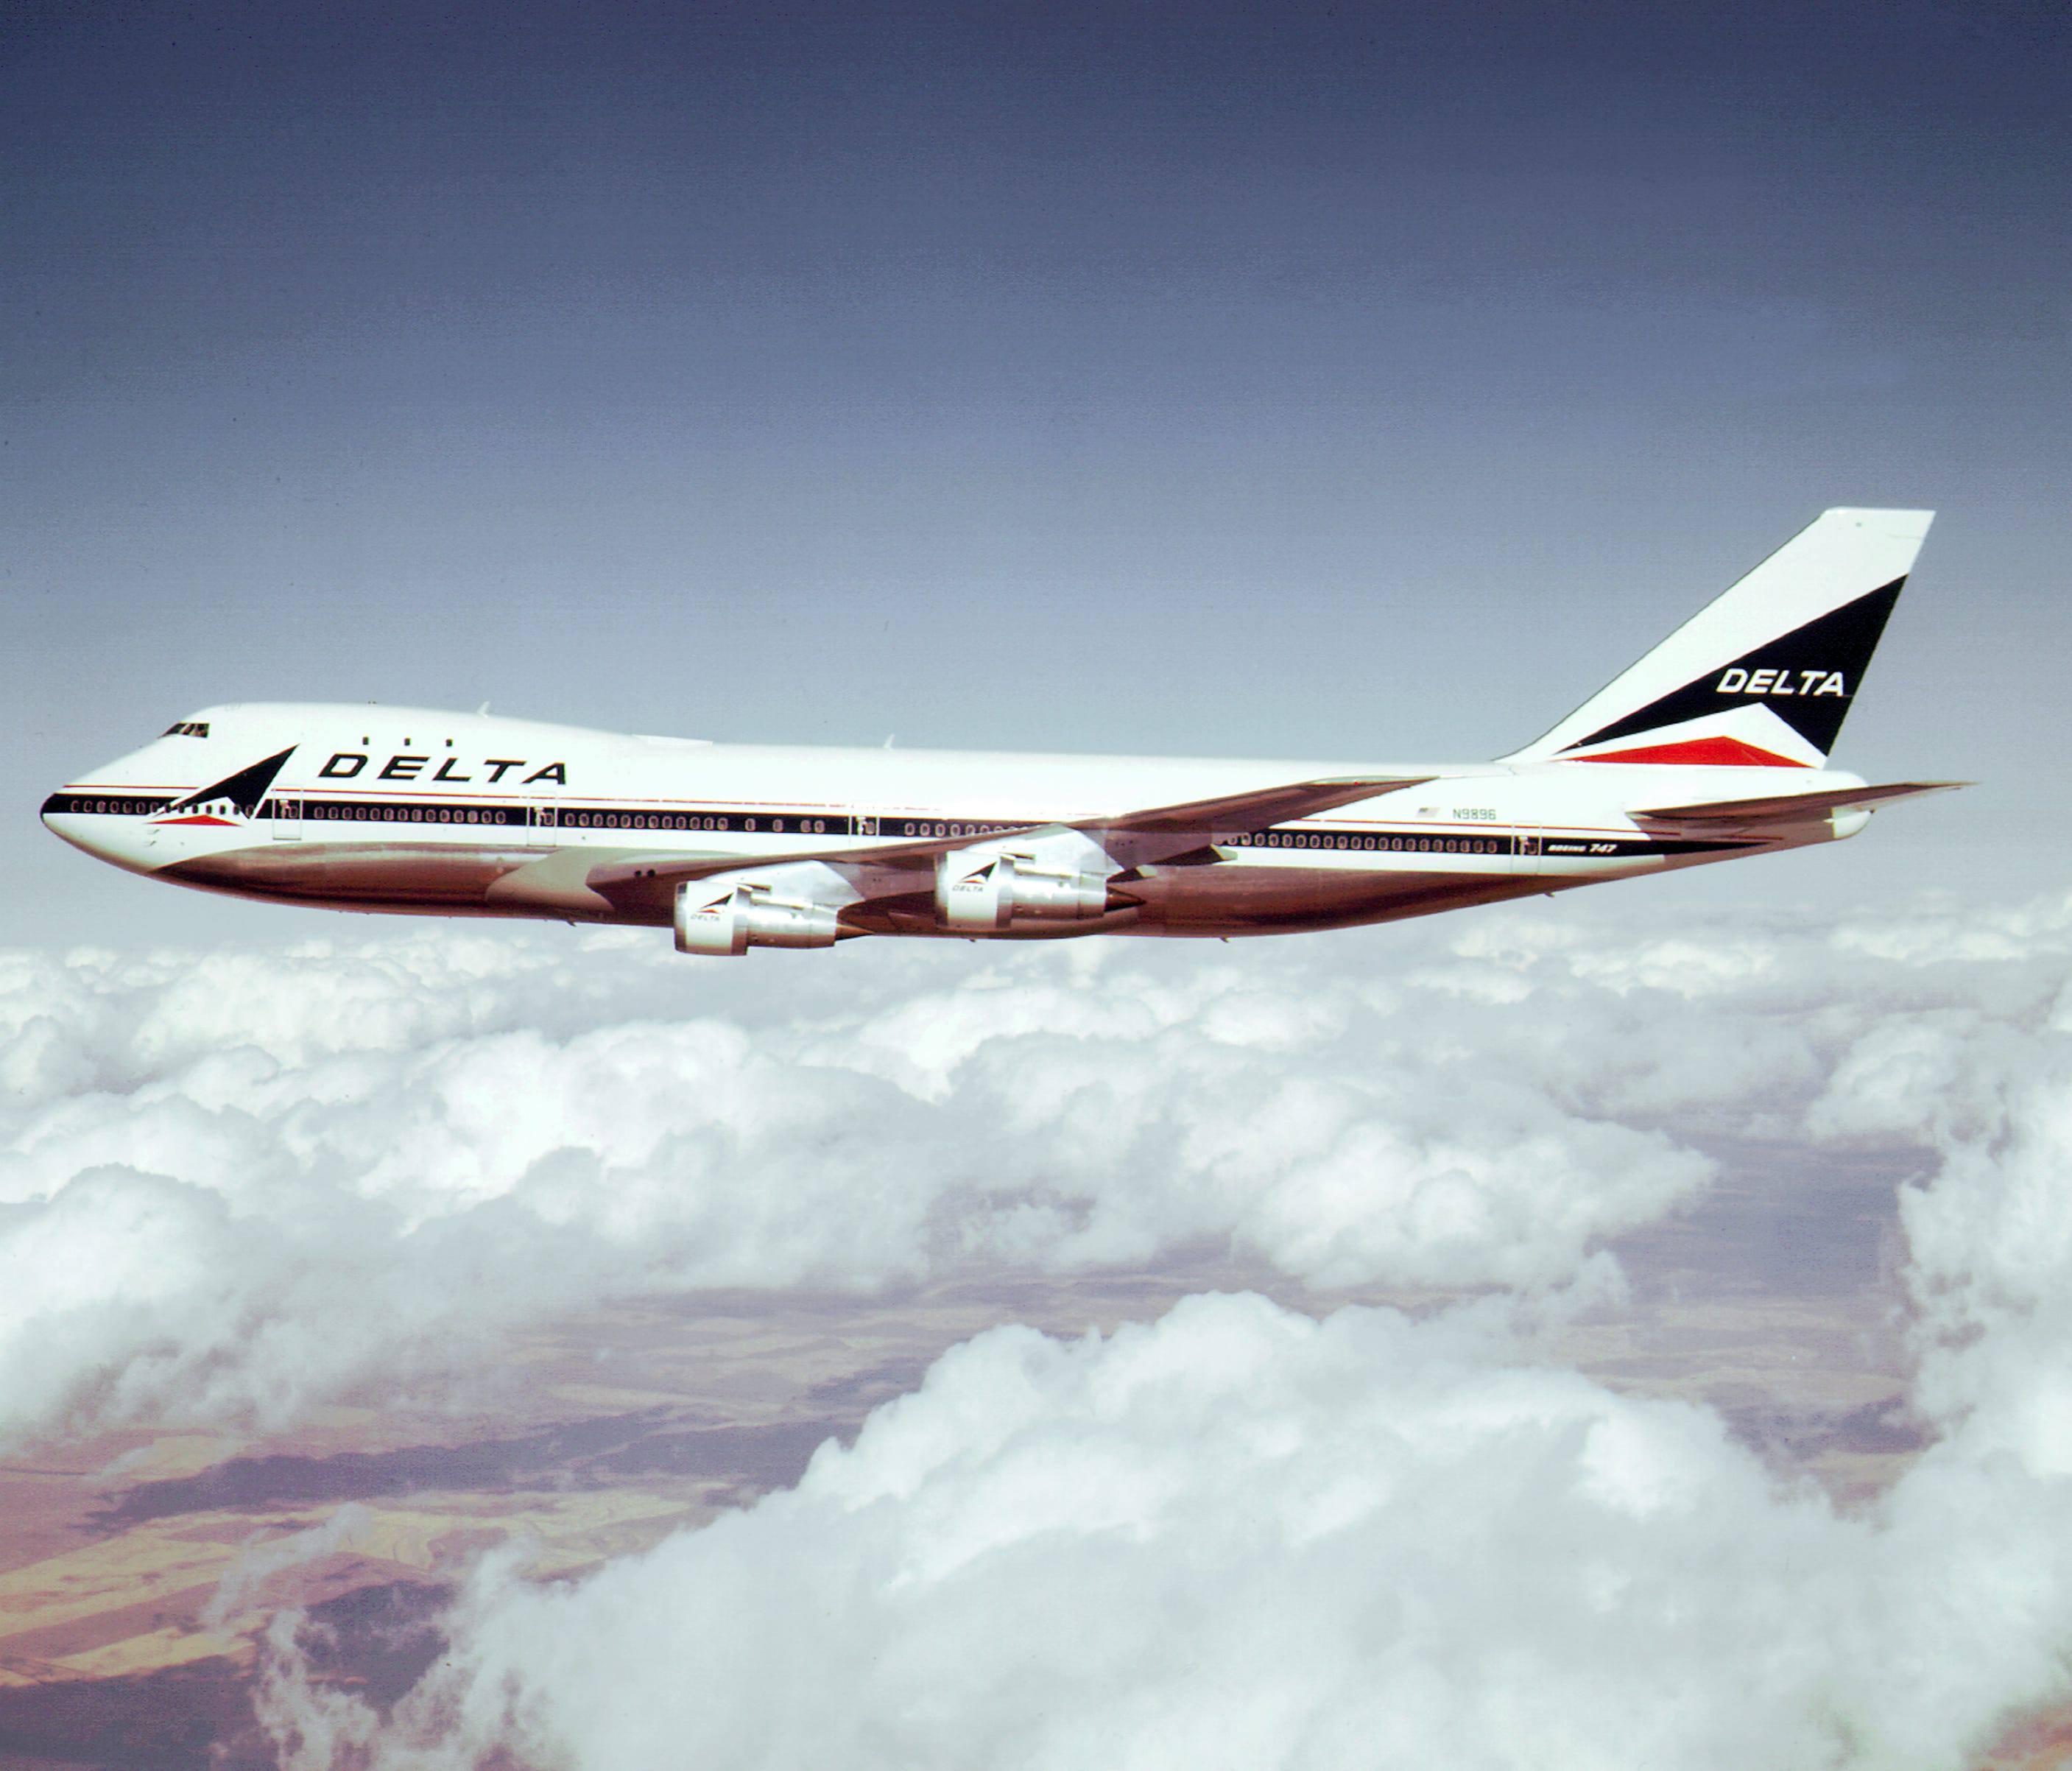 An undated photo from the 1970s showing a Delta Air Lines Boeing 747.